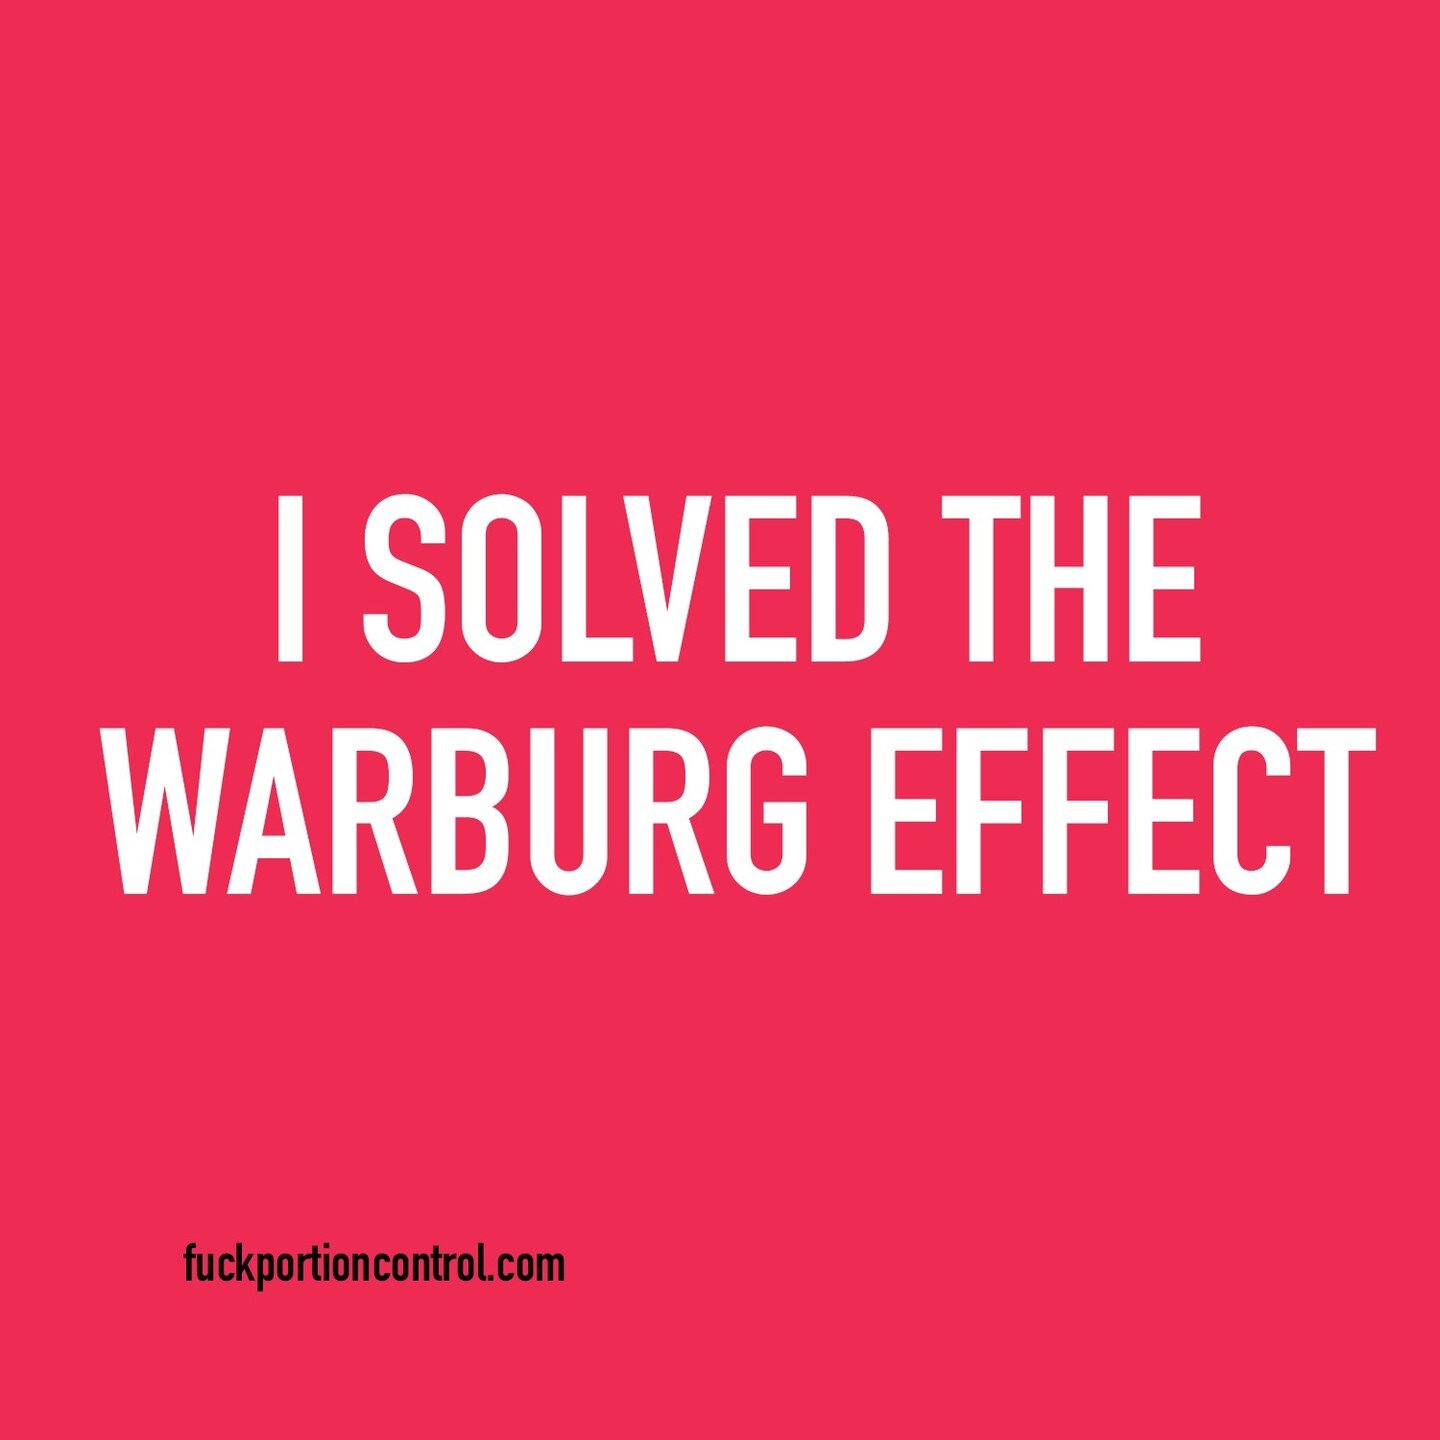 The Warburg Effect is a biological problem in cancer where cells cannot respirate properly even when there is adequate oxygen available. During the course of my research I inadvertently solved this problem and the information is now included in my bo